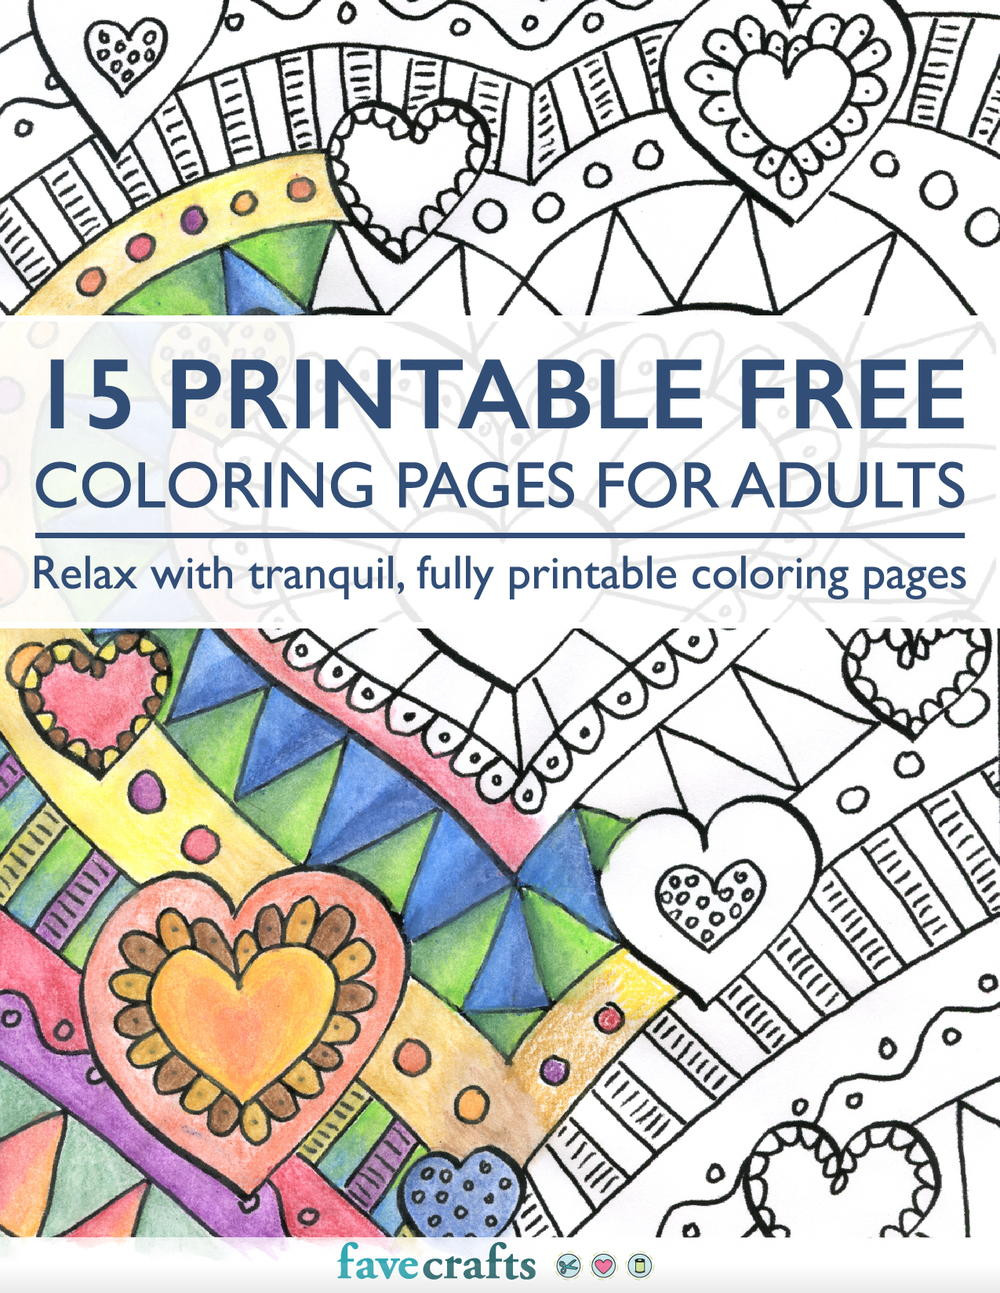 Online Coloring Books For Adults
 15 Printable Free Coloring Pages for Adults [PDF